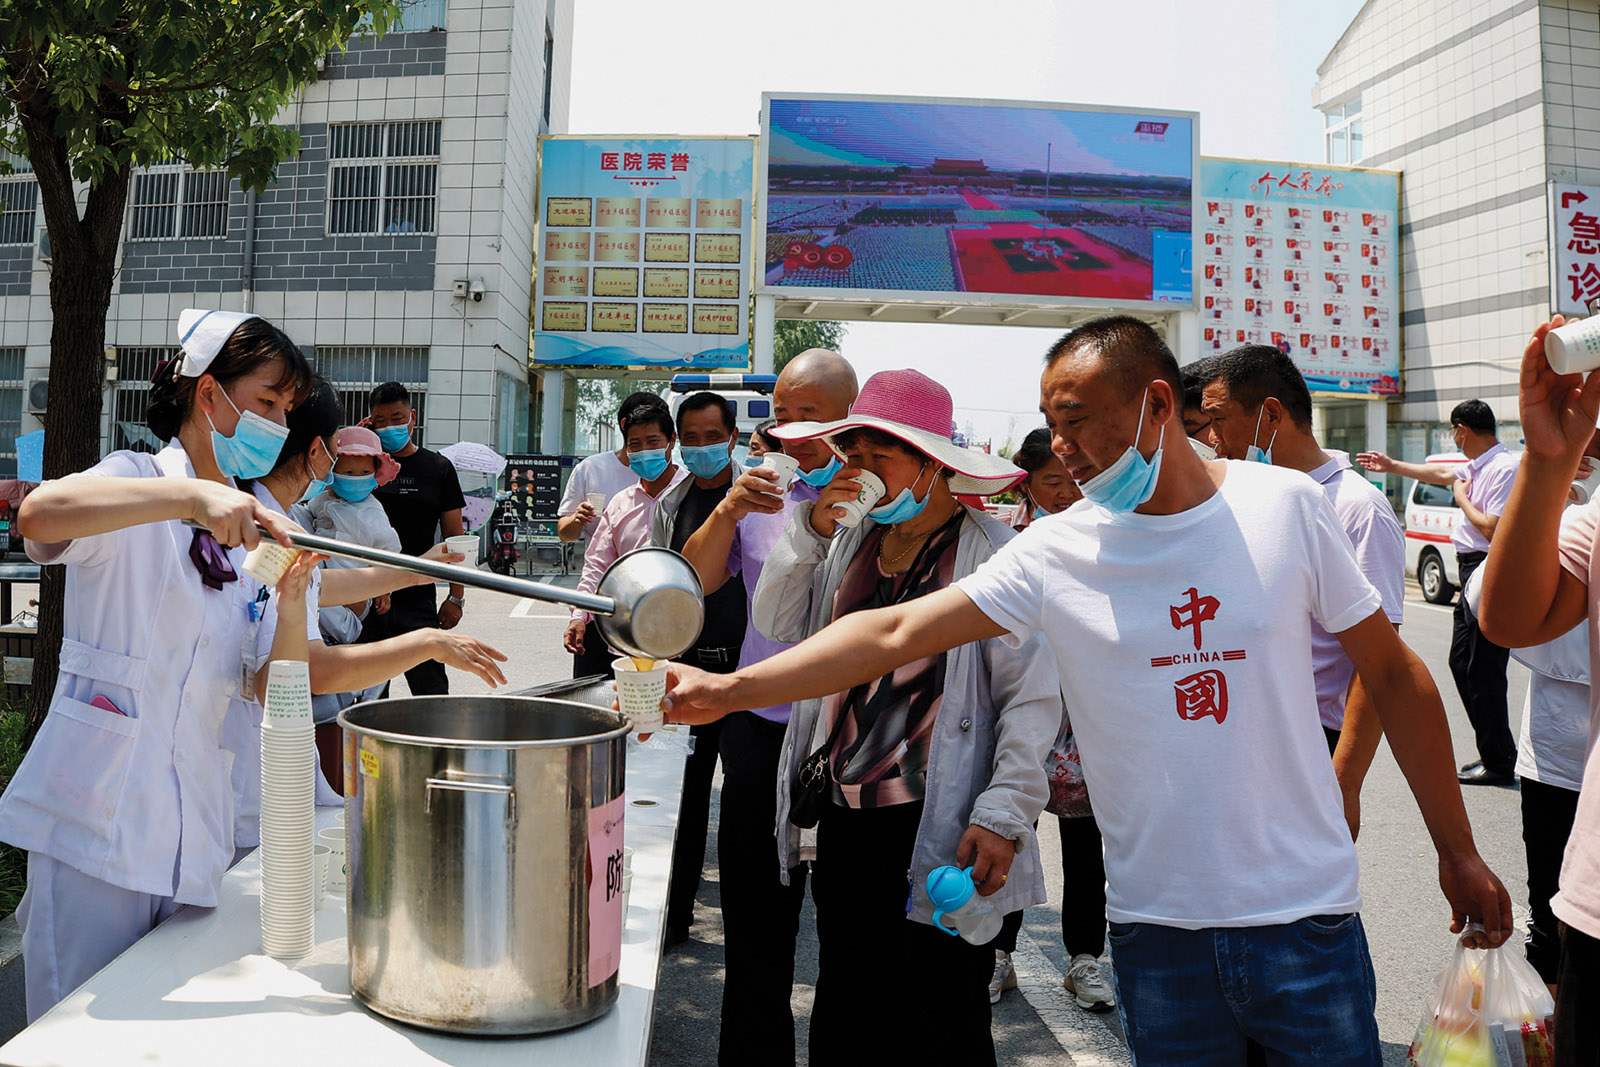 Chinese medicine being distributed for free during a rise in Covid-19 cases, Suqian, Jiangsu province, China